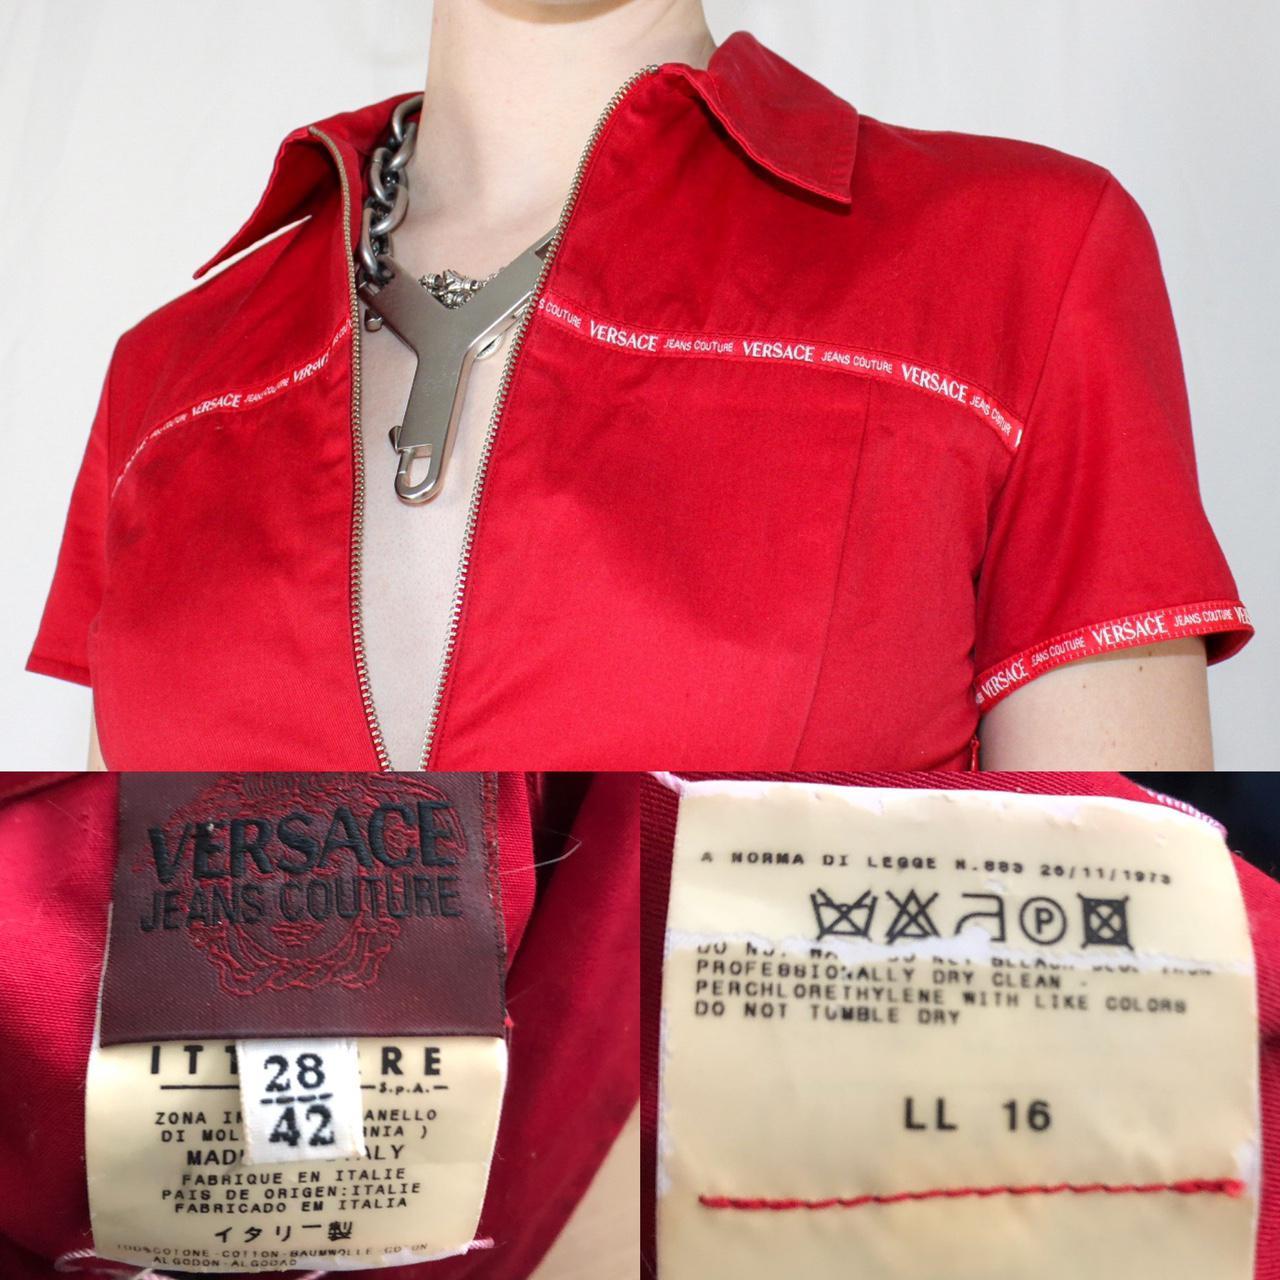 Product Image 4 - Vintage Versace Jeans Couture sexy